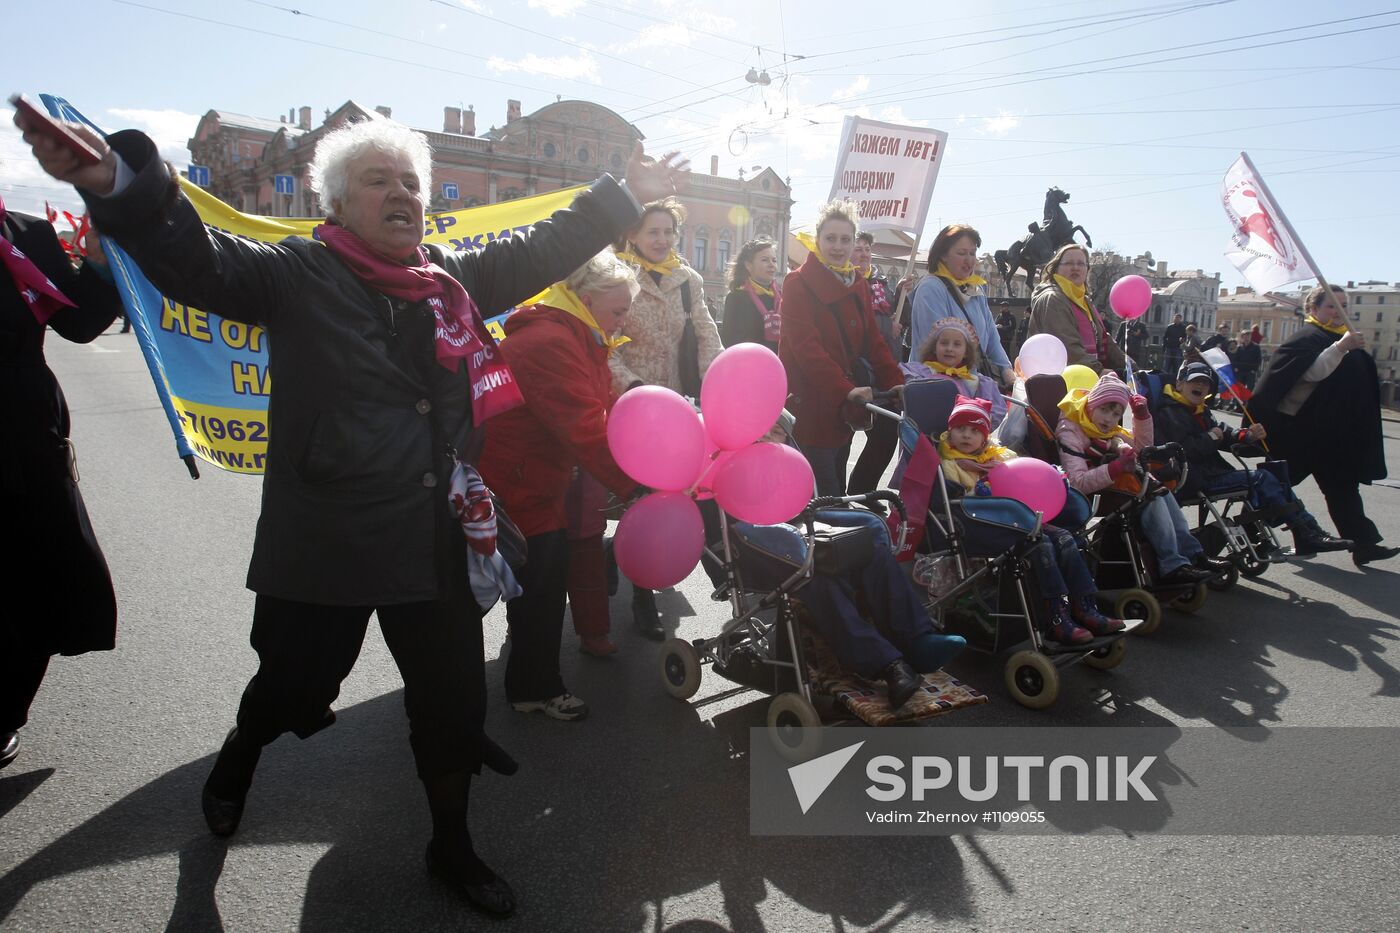 May Day rallies in St Petersburg